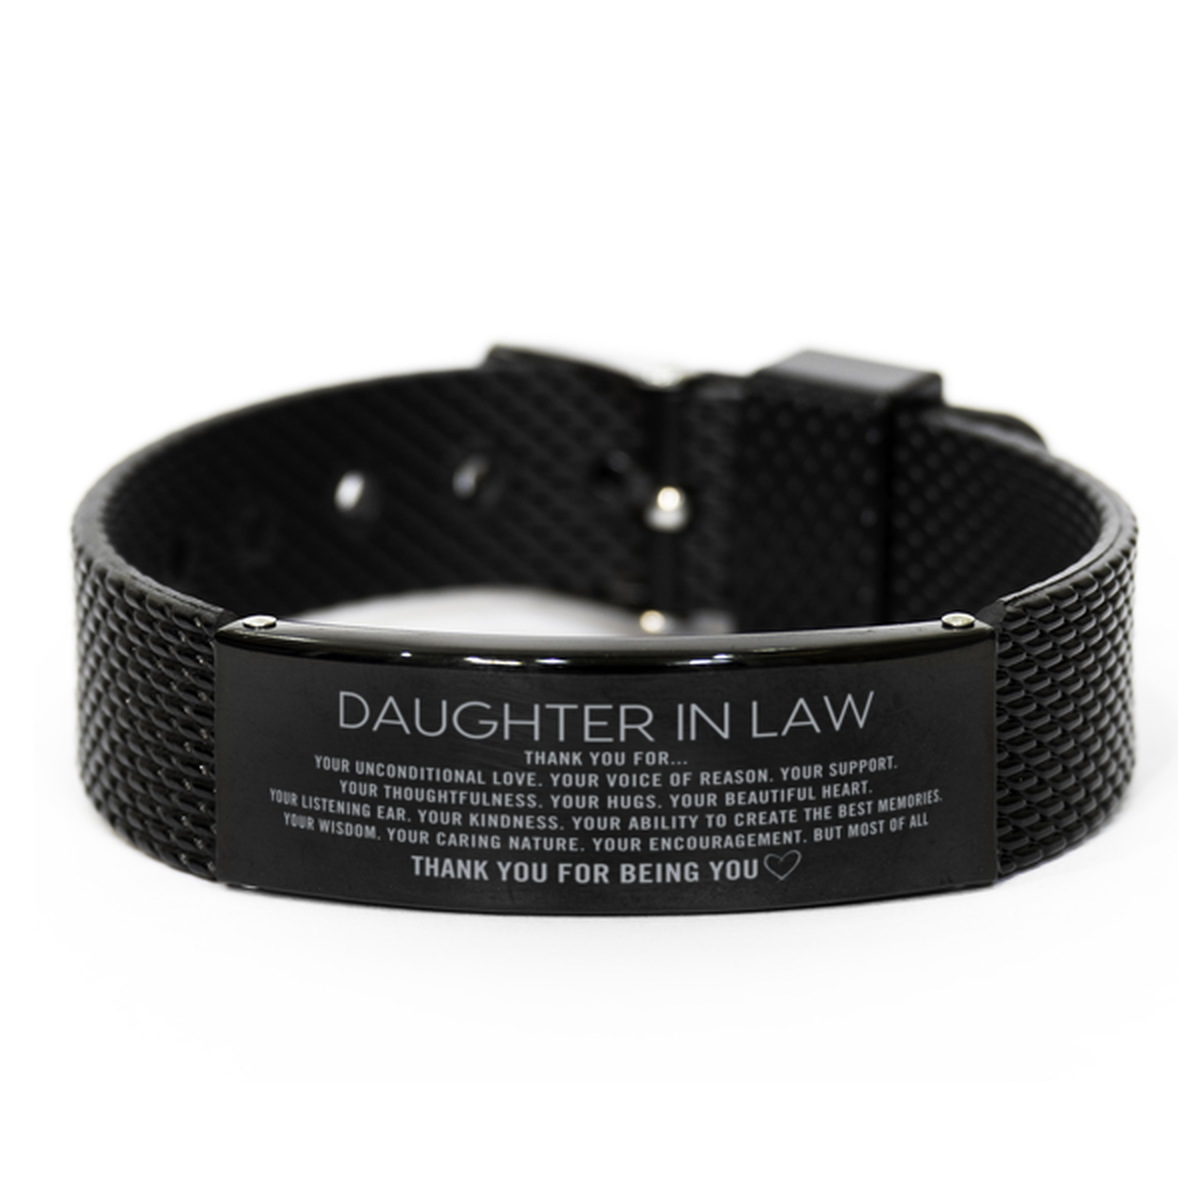 Daughter In Law Black Shark Mesh Bracelet Custom, Engraved Gifts For Daughter In Law Christmas Graduation Birthday Gifts for Men Women Daughter In Law Thank you for Your unconditional love